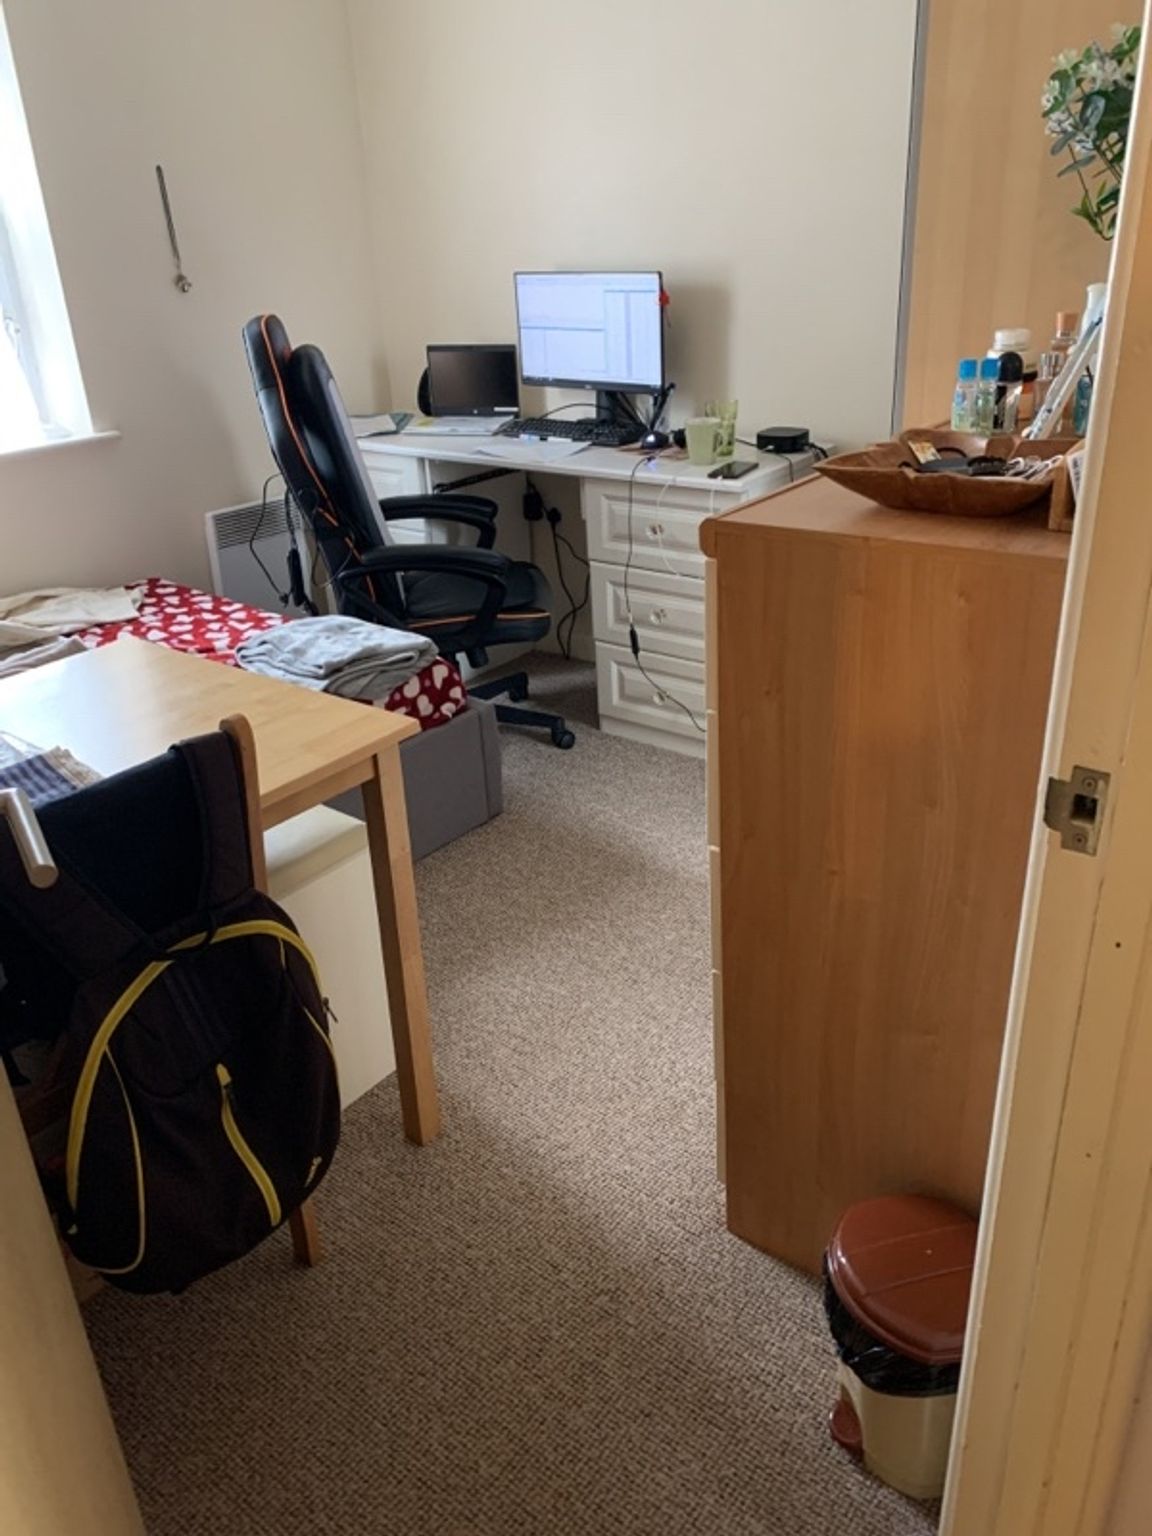 ***IDEAL FOR PROFESSIONAL COUPLE*** Ground Floor Apartment. Excellent links M1 corridor, 5 mins Junc. 27. Train & trams to Nottm & Mansfield. White goods included.